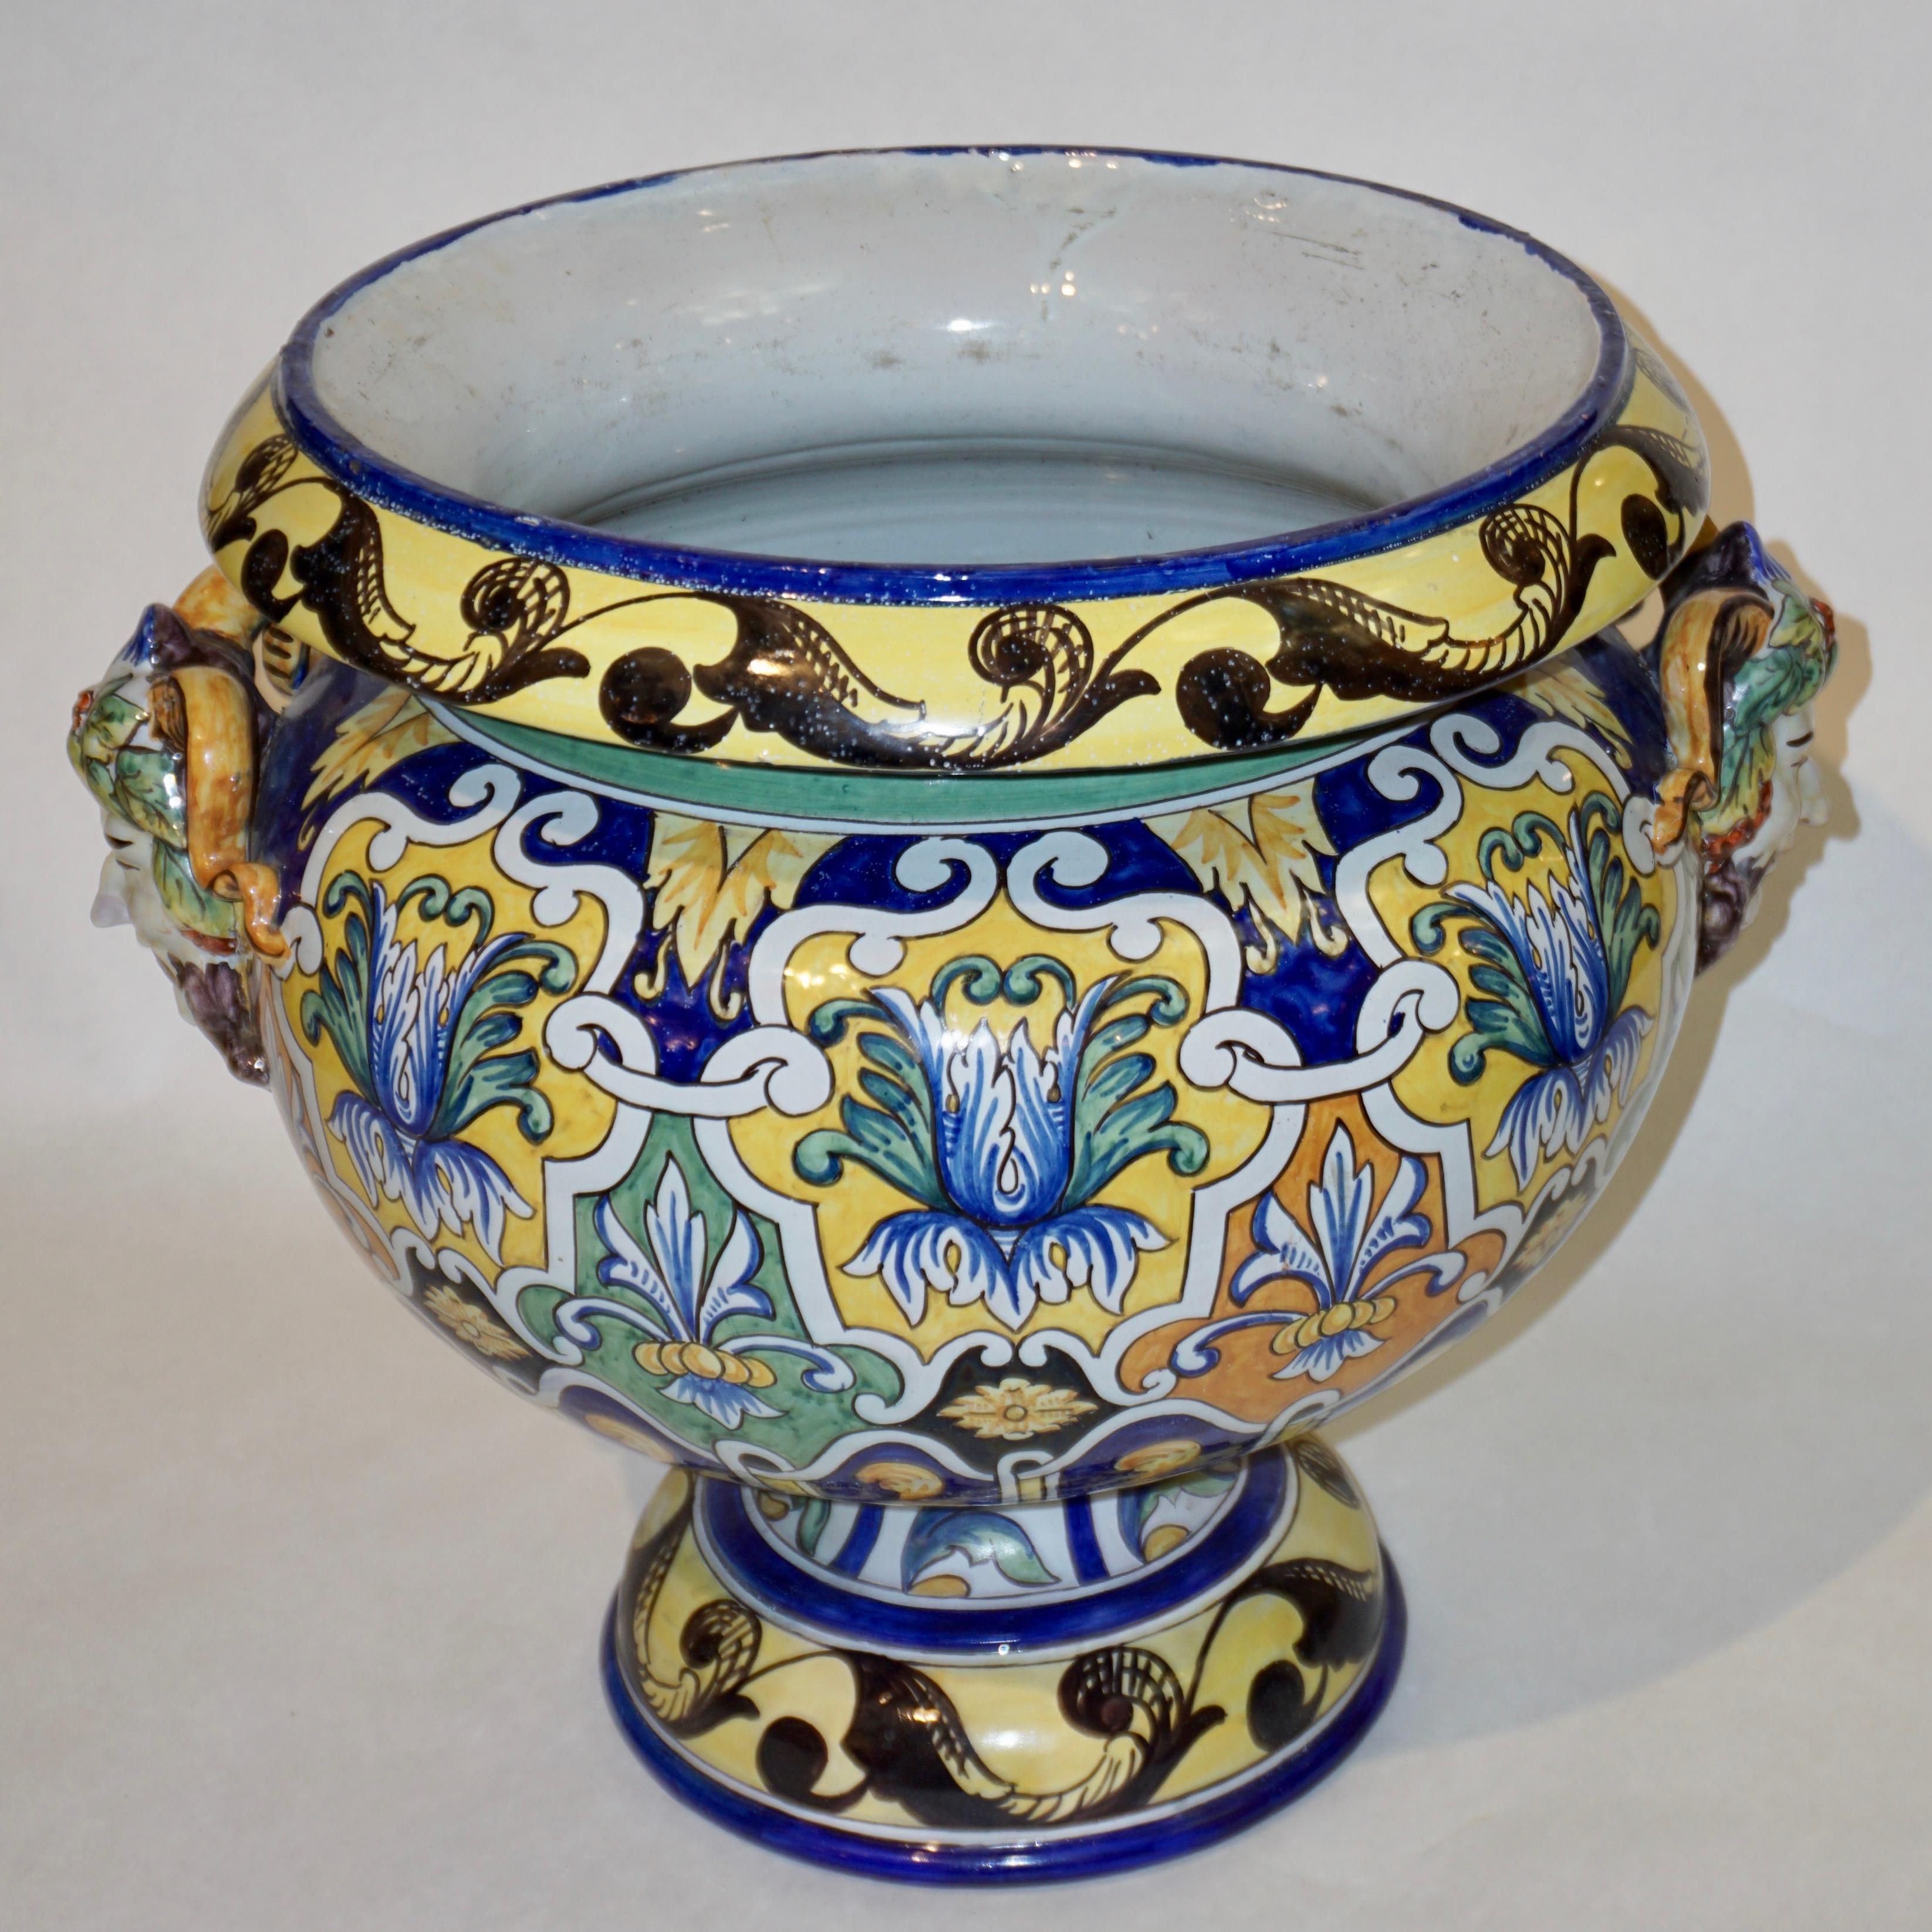 Circa 1875-1889, large two-part French Provincial faience jardinière / planter, entirely hand painted, with its matching rimmed stand that can also be used as a jardin d'hiver stool, with the signature of Antoine Montagnon (1838-1899), owner of the